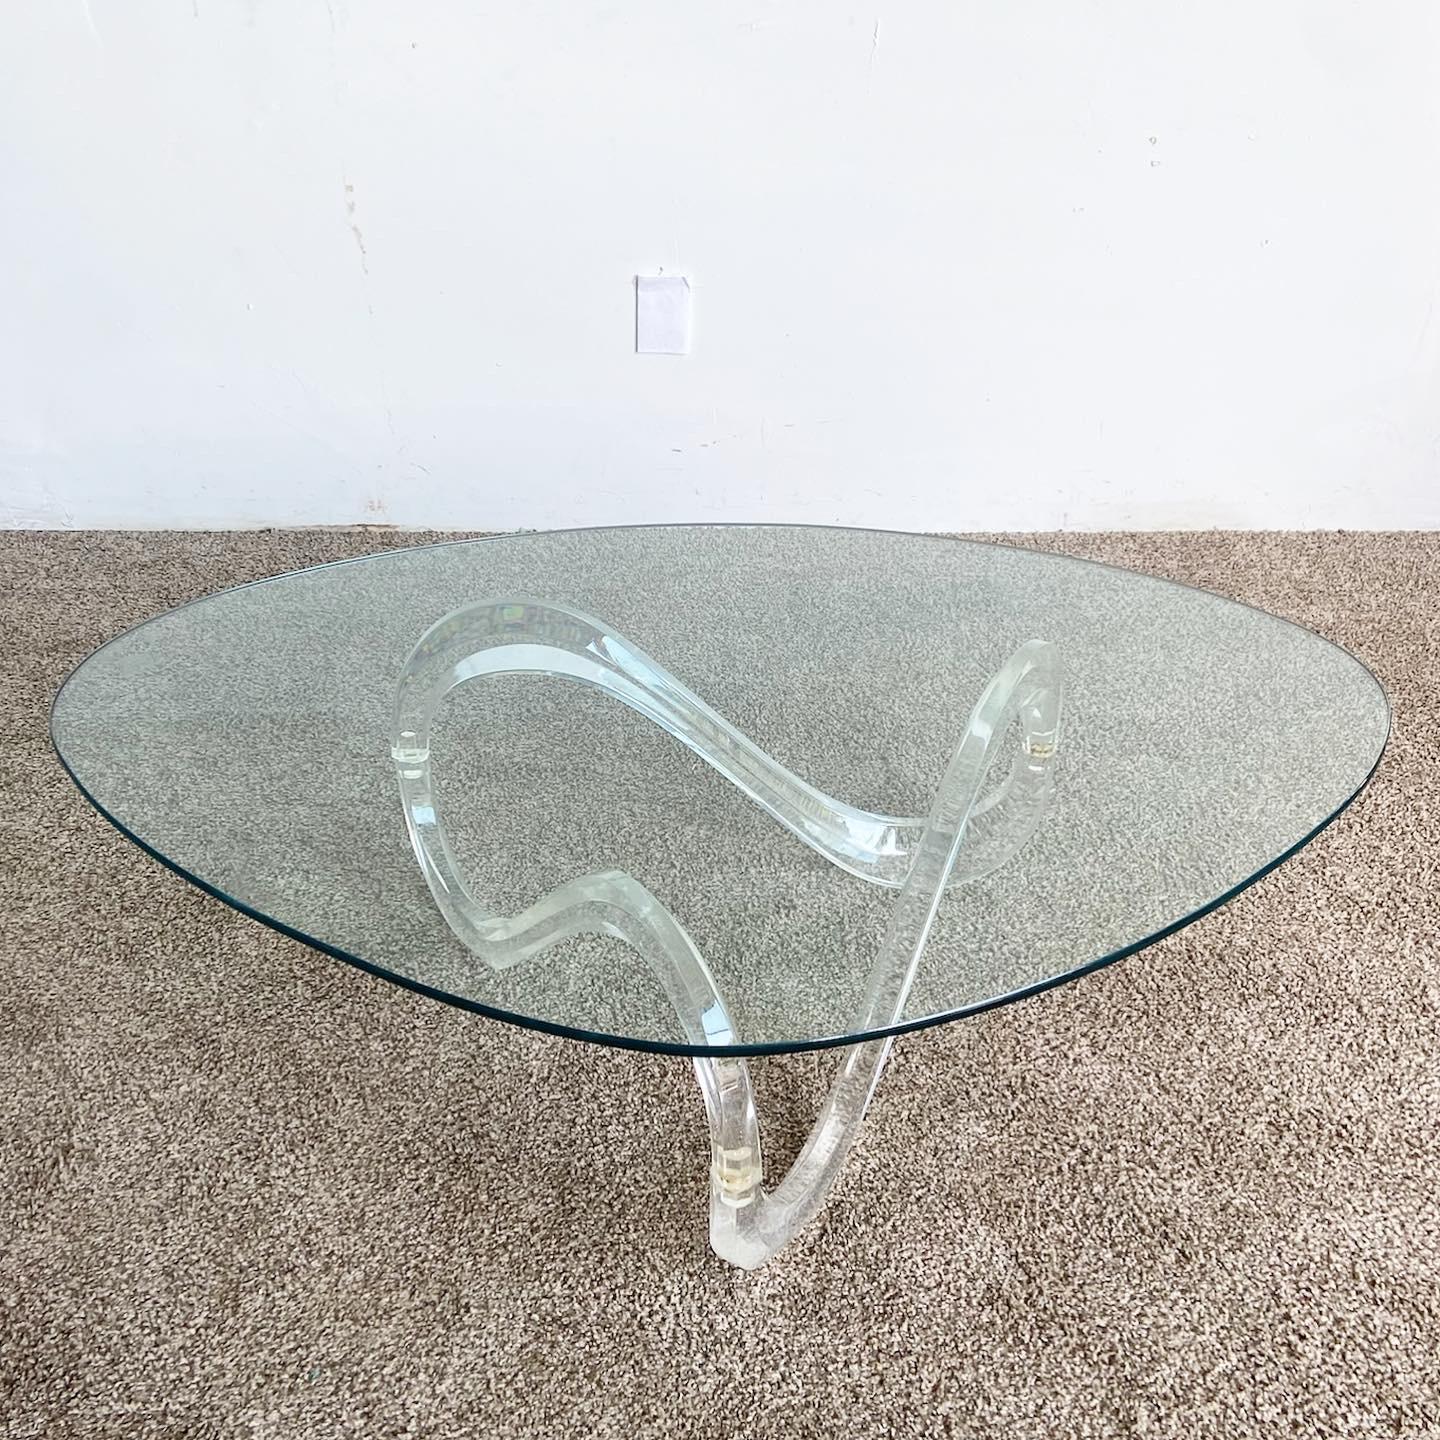 Amazing vintage postmodern infinity lucite coffee table. Features a rounded triangle glass top which rests on a sculpted lucite base.